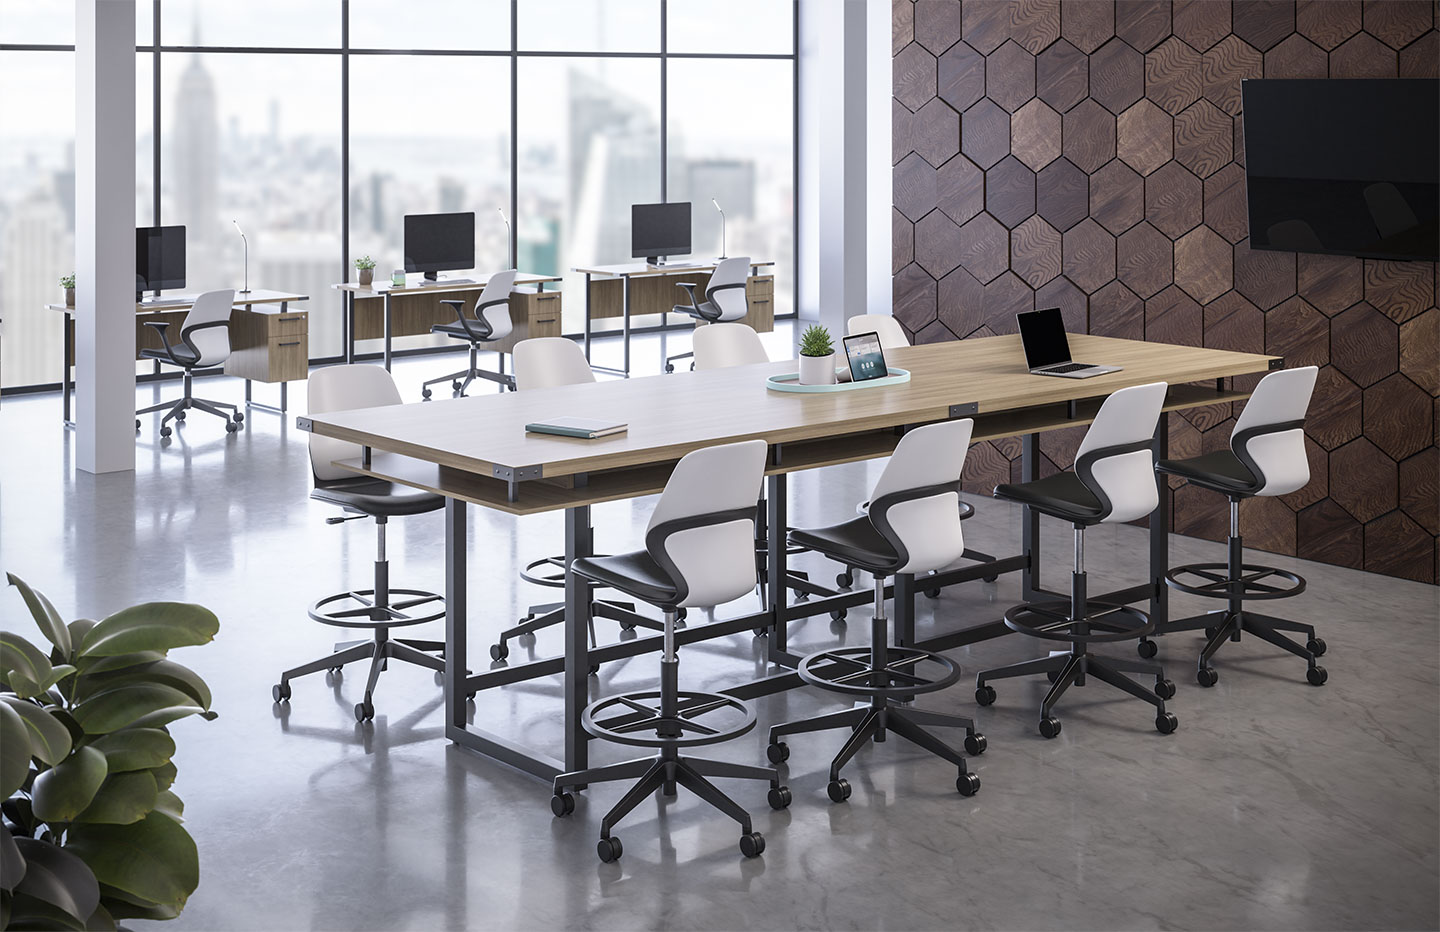 A fallback picture of Arcozi and Mirella furniture in an open office